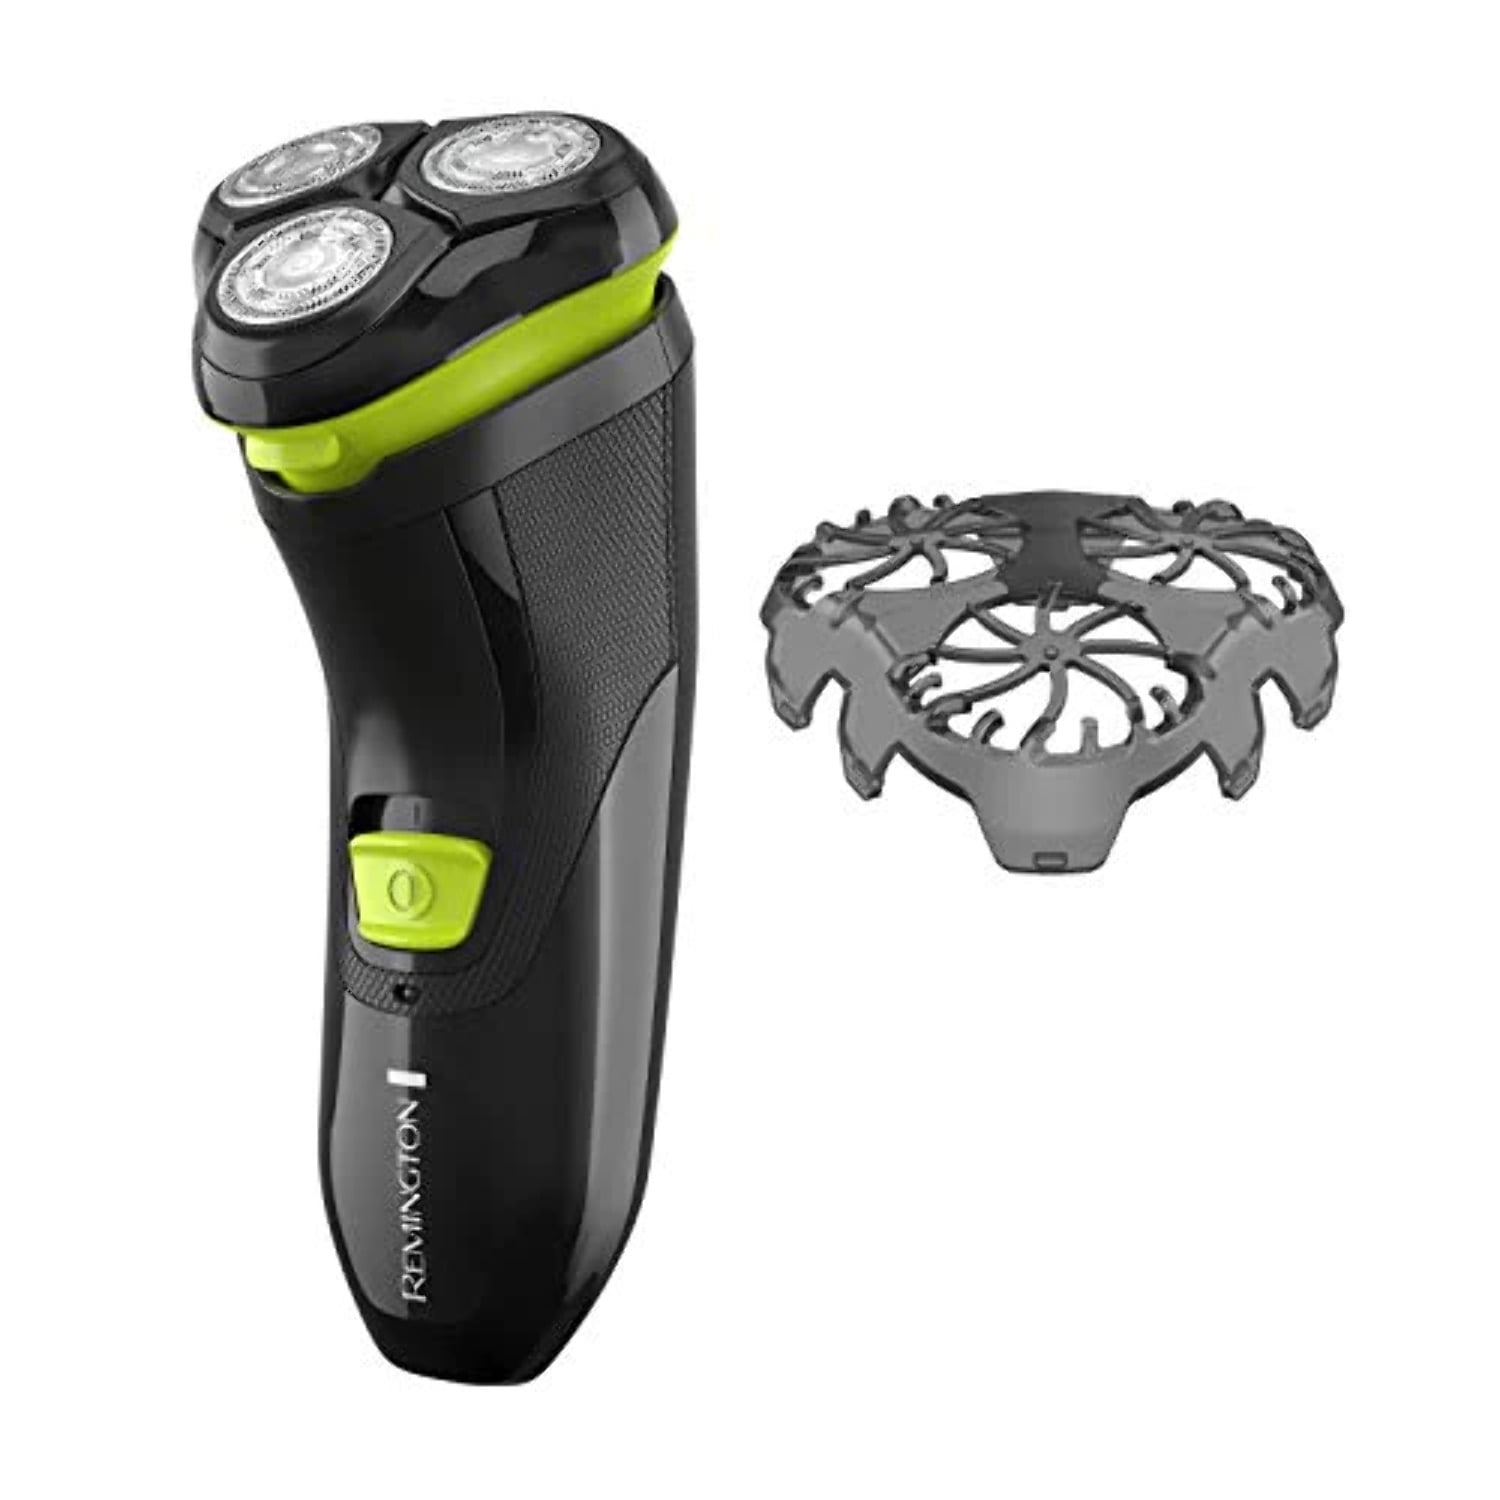 Picture of Remington PR1320 UltraStyle Rechargeable Rotary Shaver